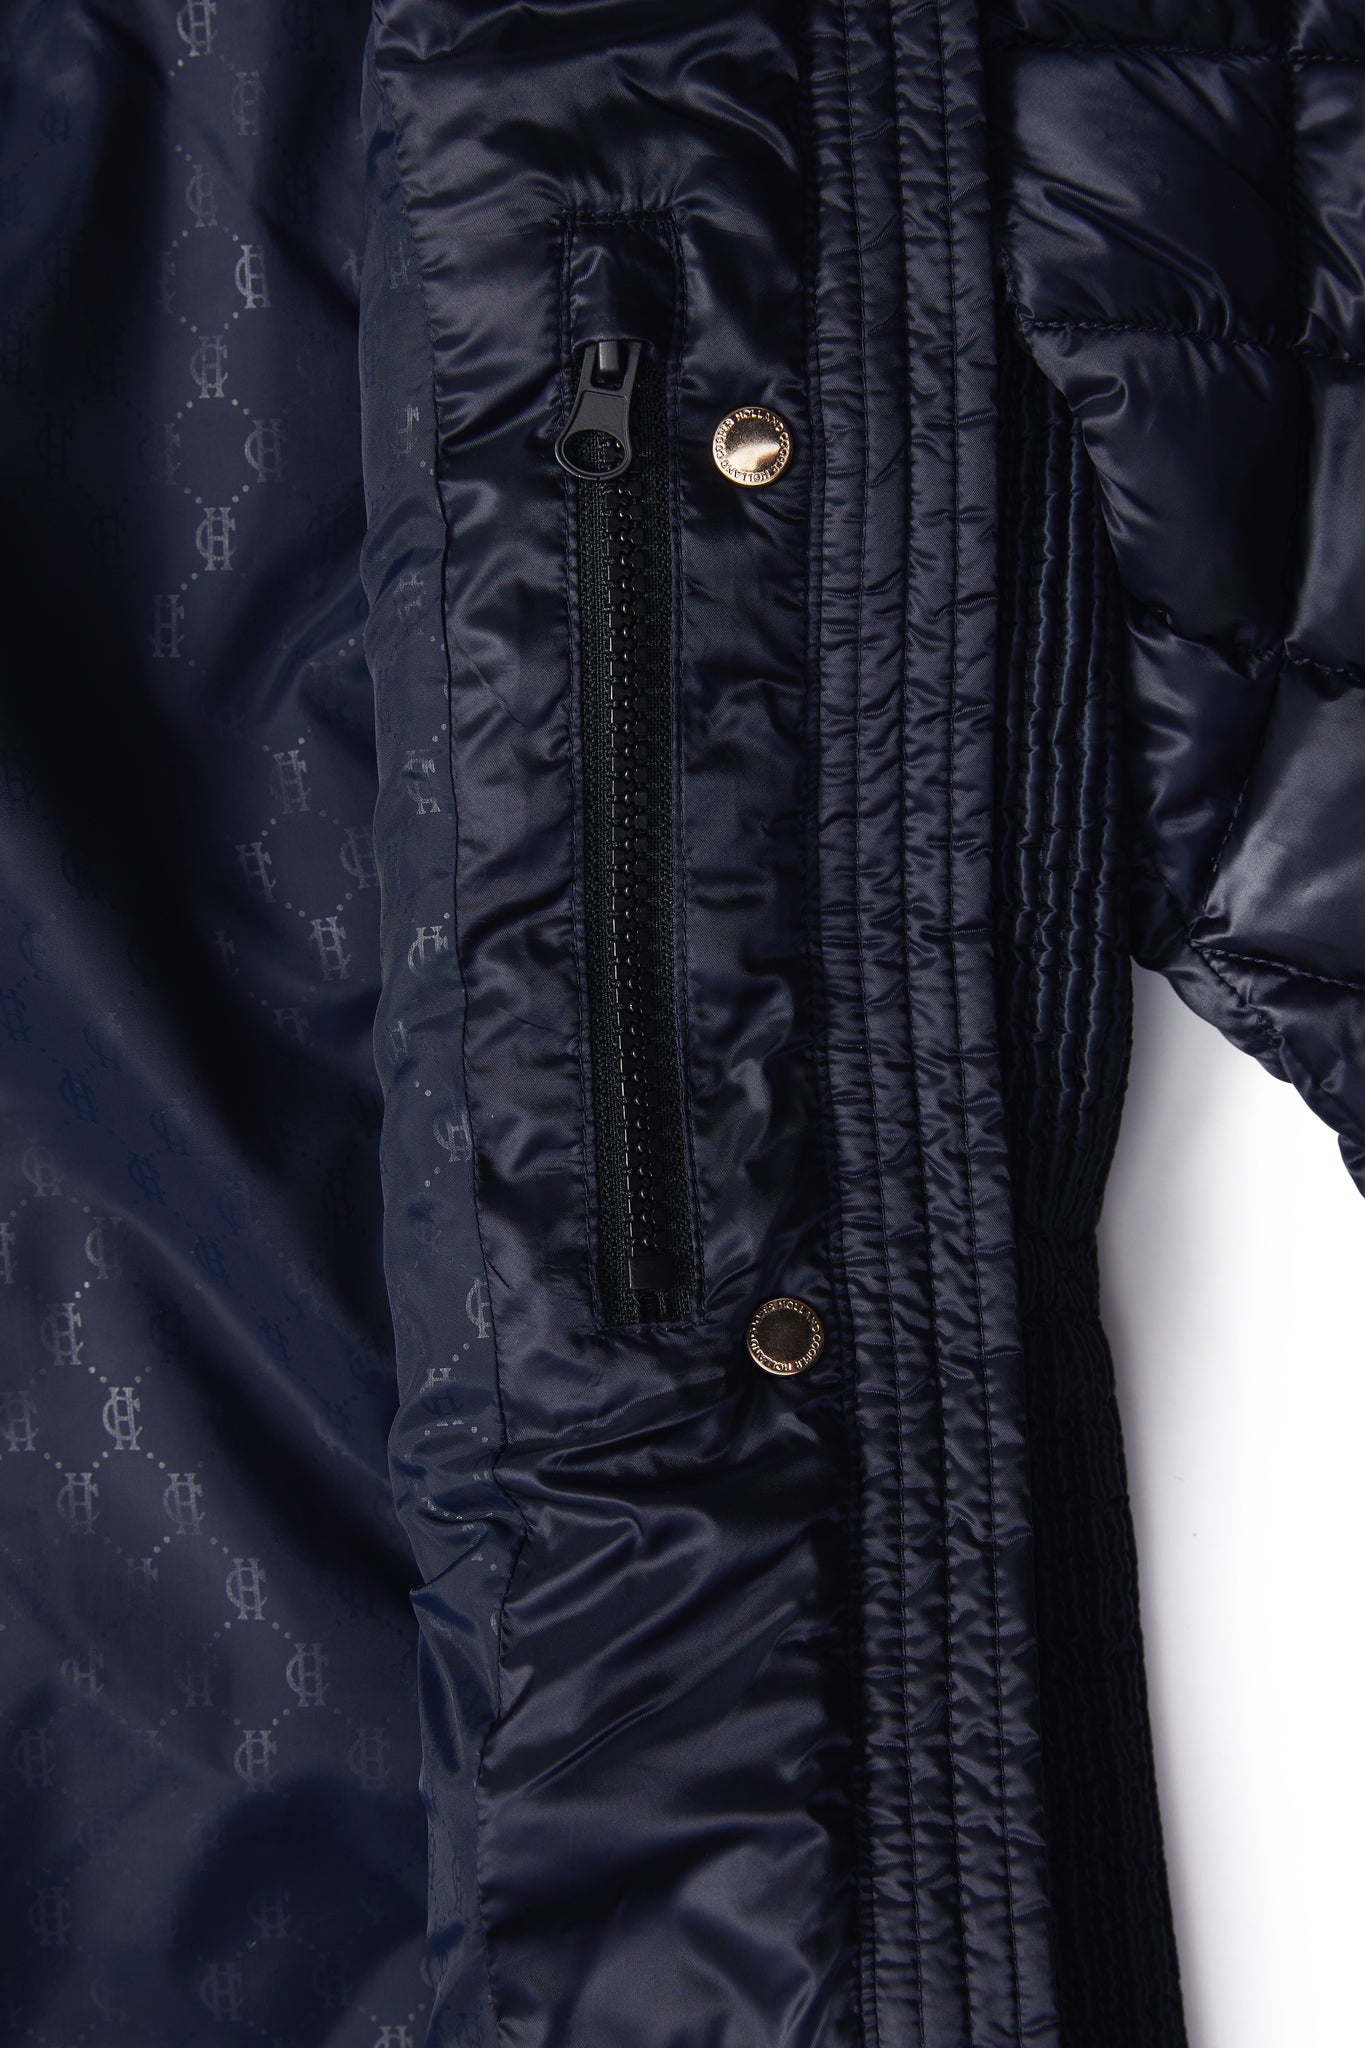 inside pocket detail on womens diamond quilted navy jacket with contrast tan leather elbow and shoulder pads large front pockets and shirred side panels